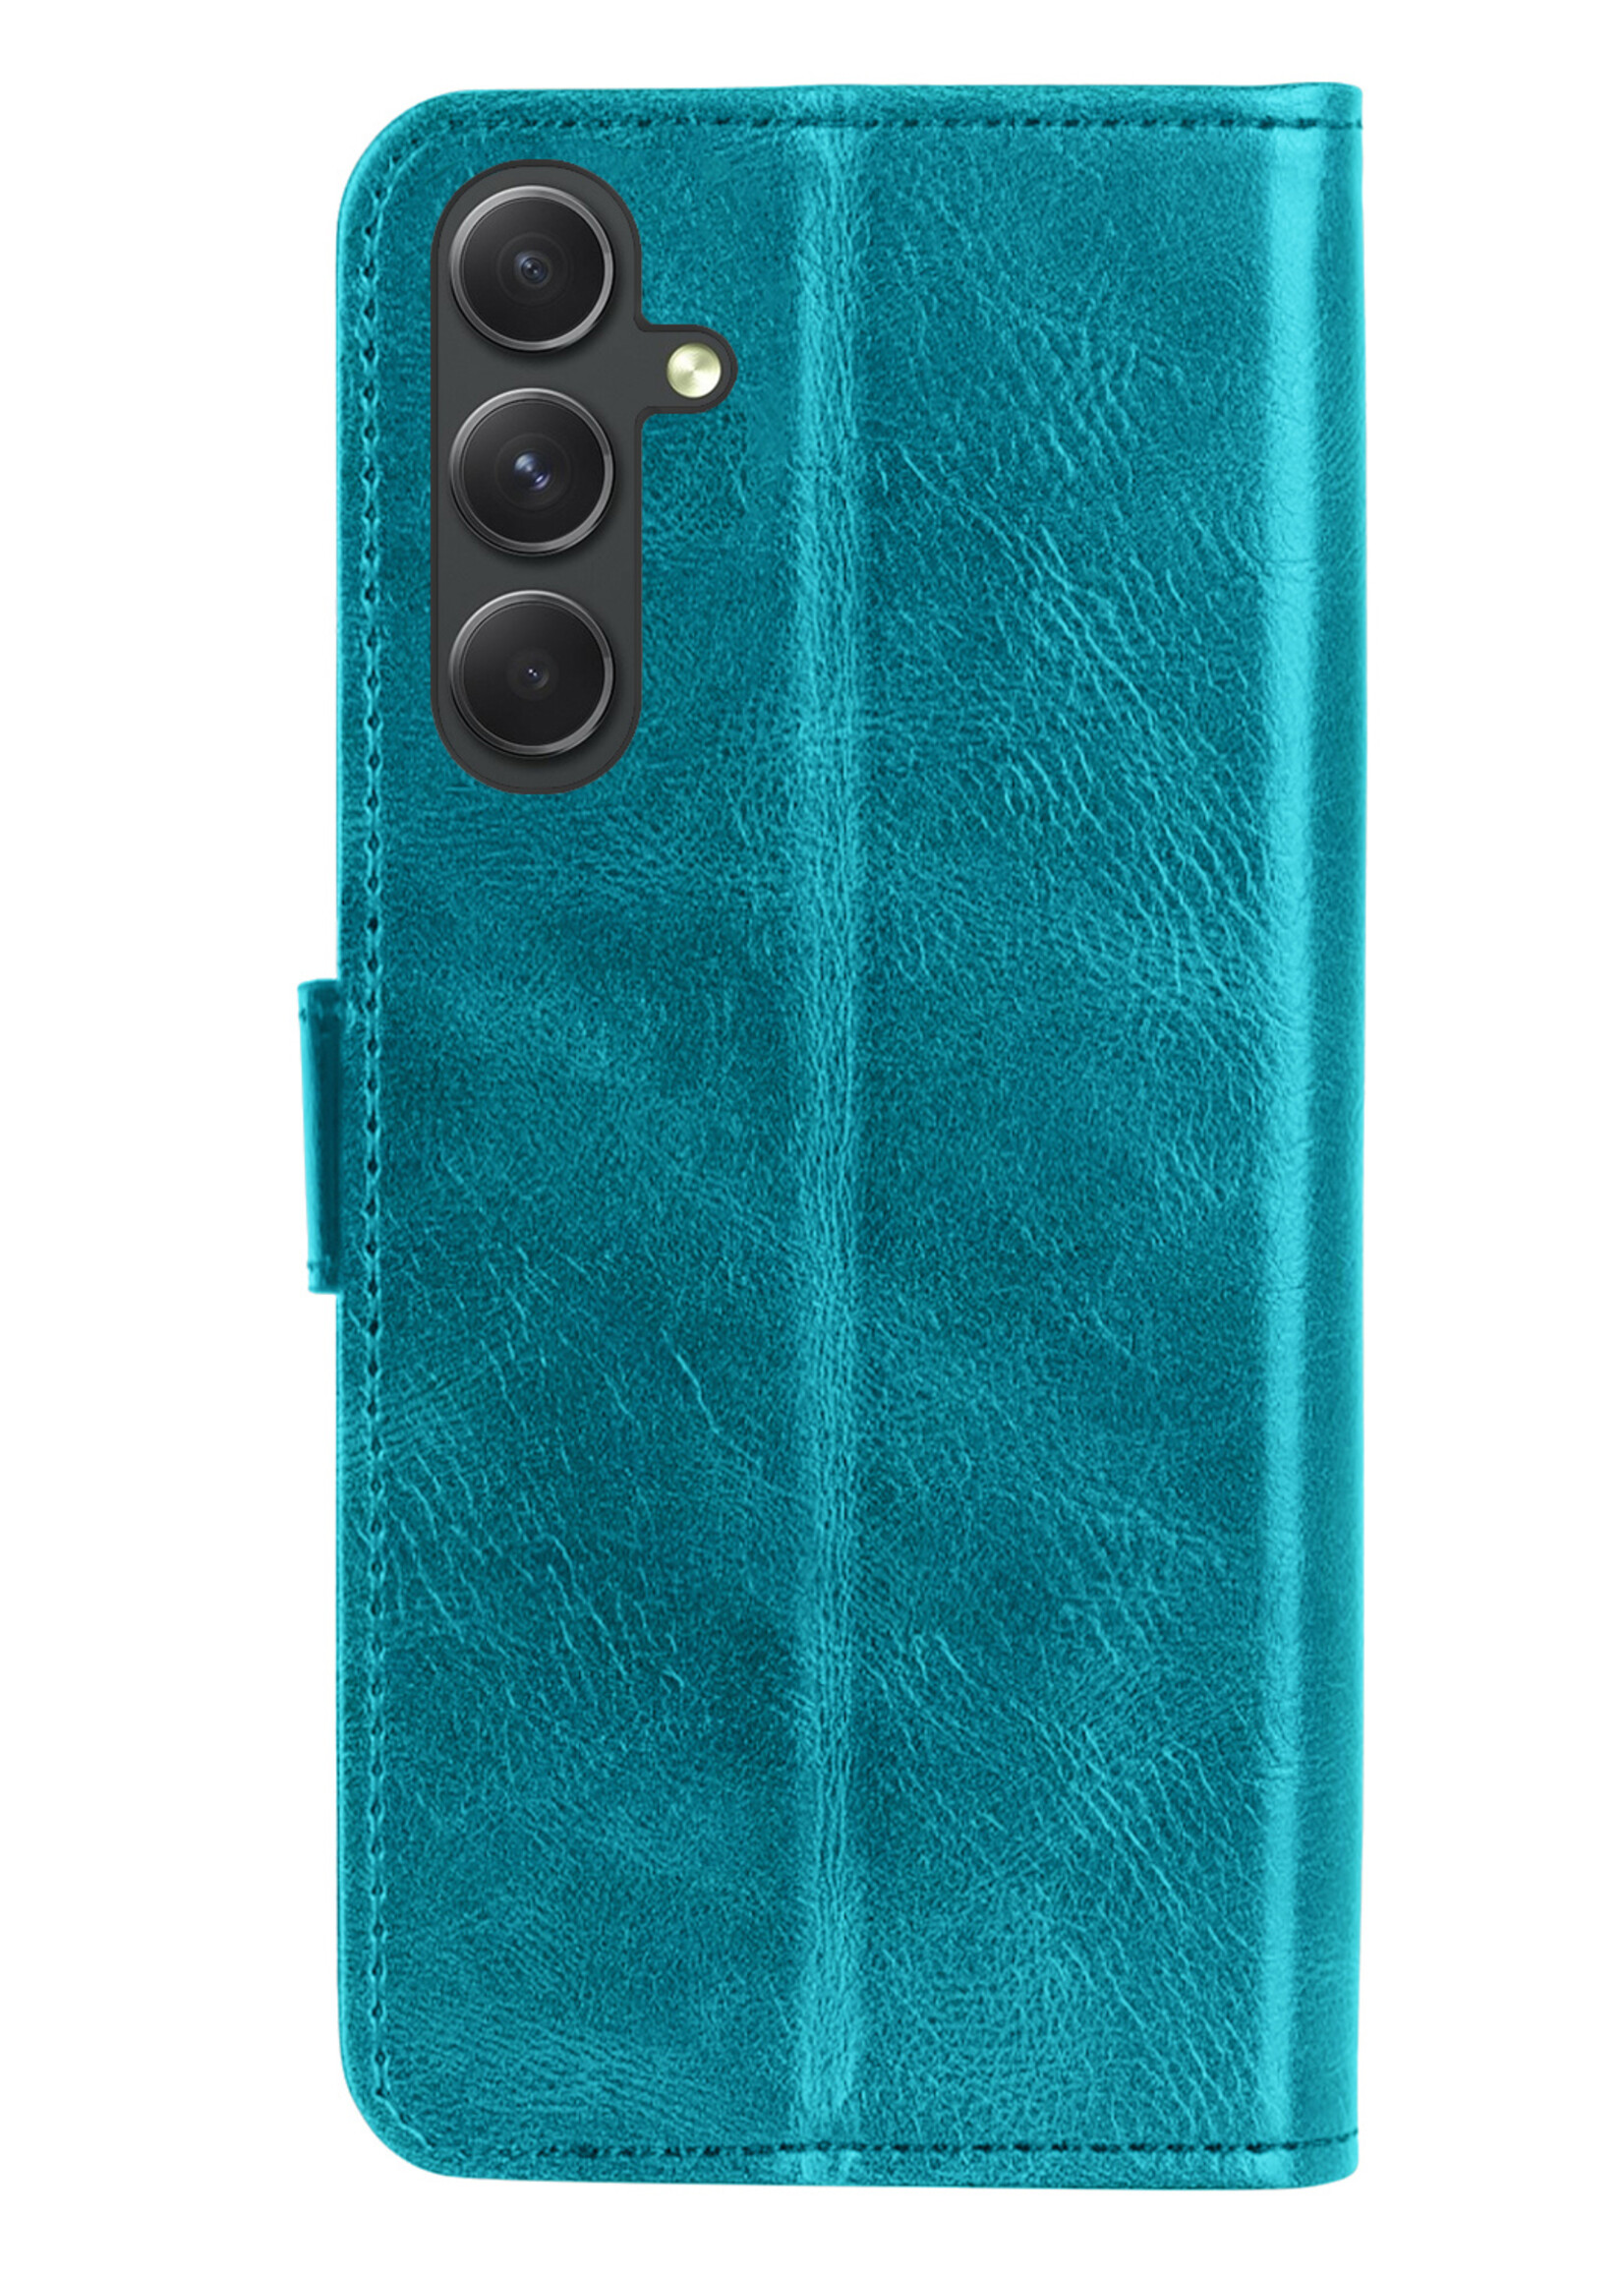 BTH Samsung A54 Hoesje Book Case Hoes Portemonnee Cover Walletcase - Samsung Galaxy A54 Hoes Bookcase Hoesje - Turquoise